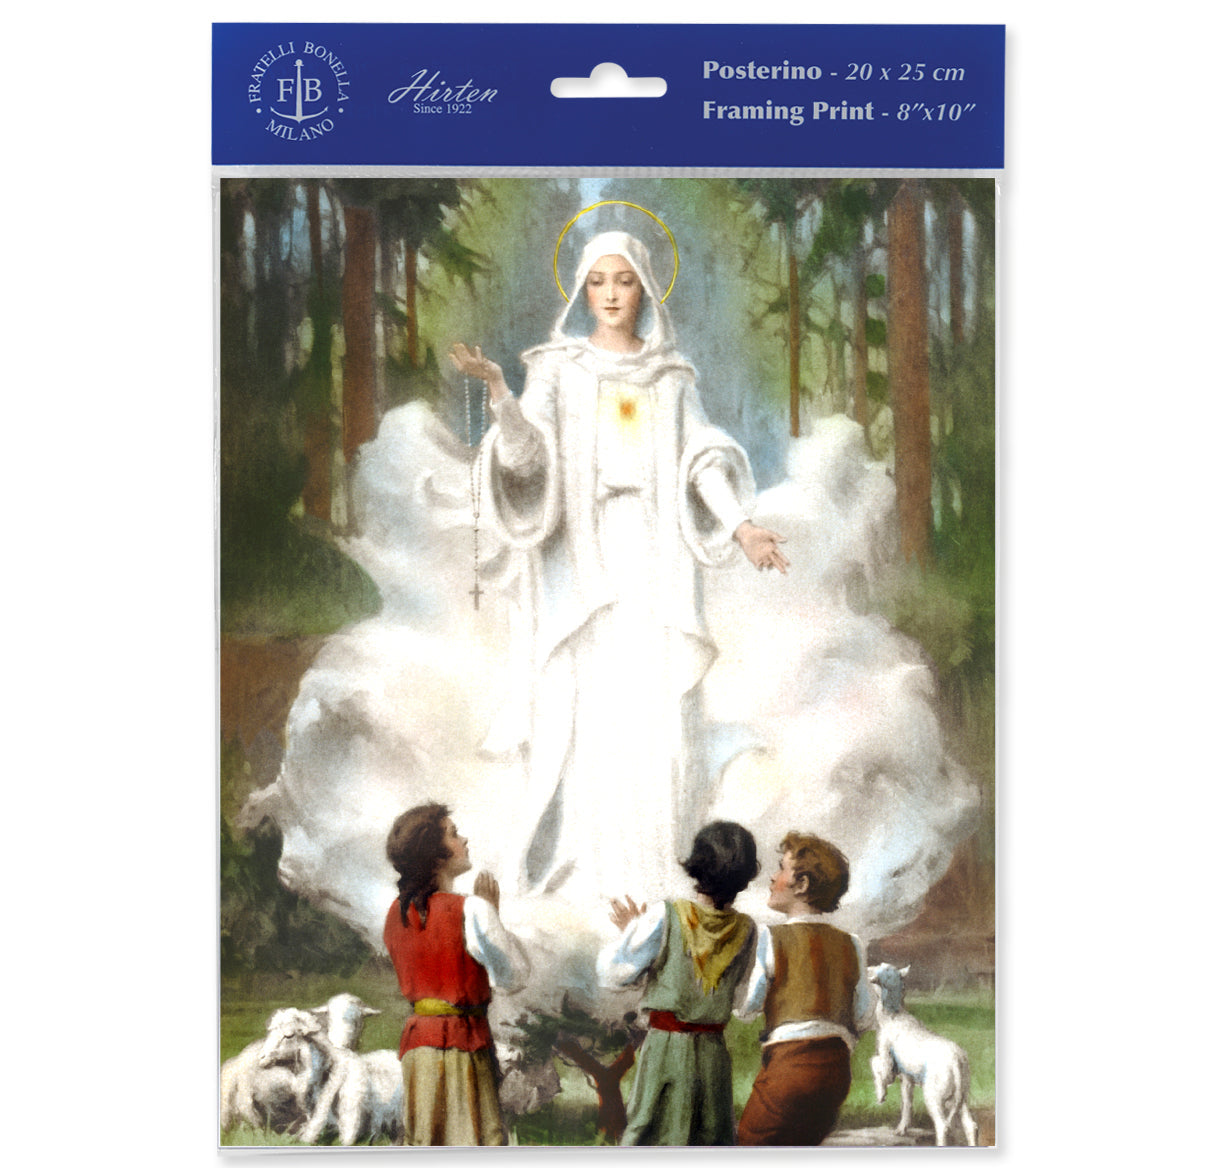 Our Lady of Fatima Framing Print, Medium, Print Only